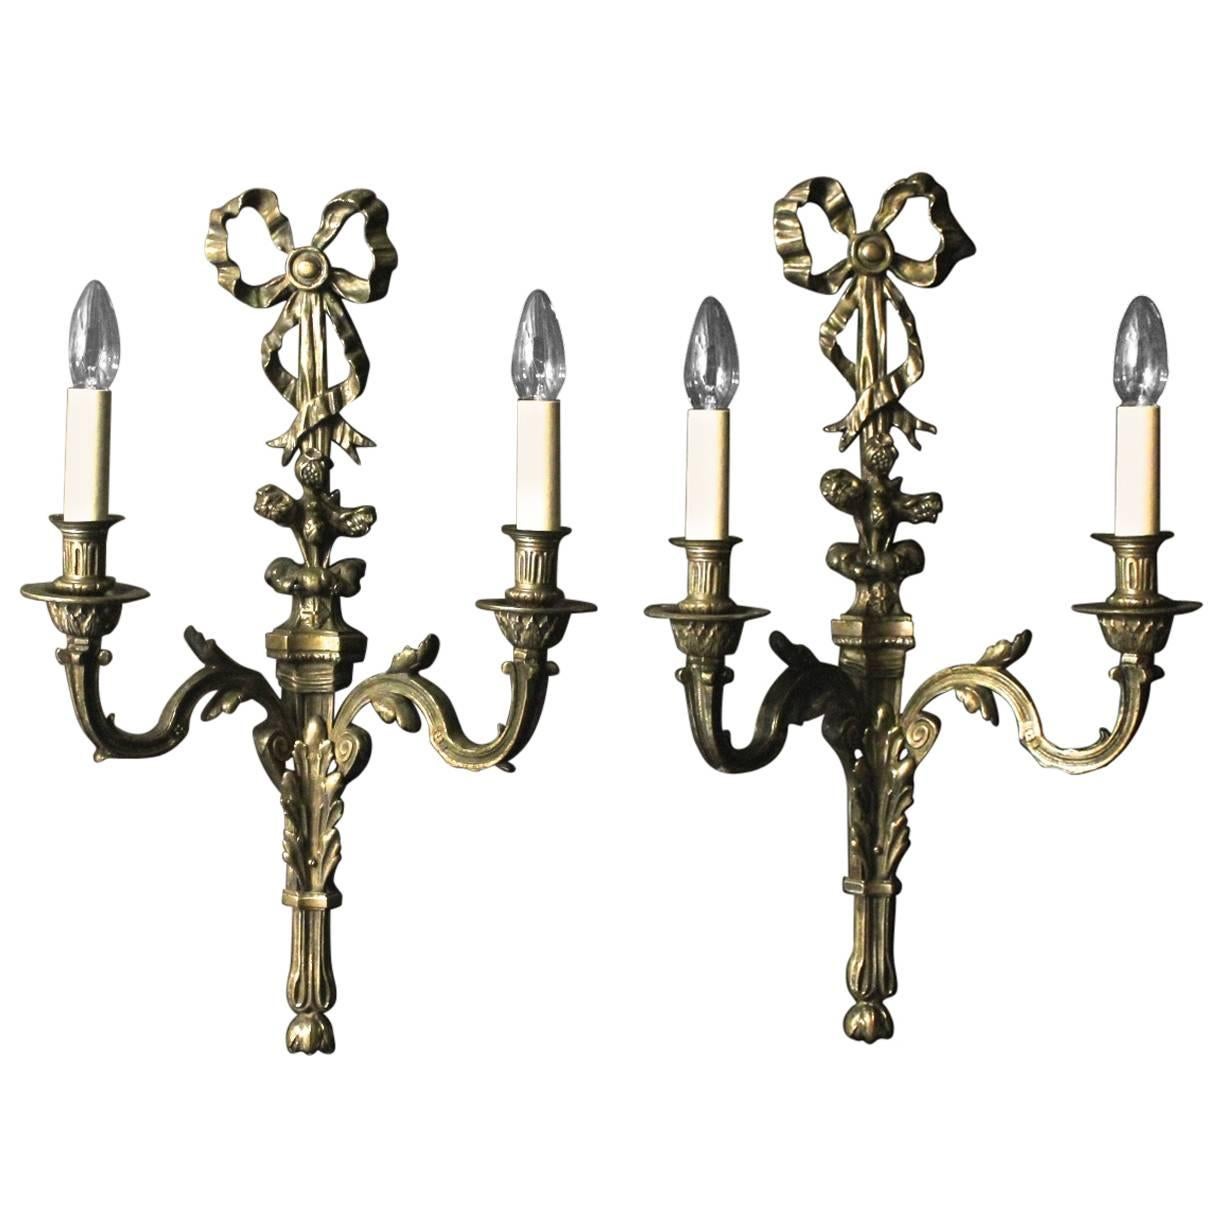 French Pair of Bronze Antique Wall Sconces